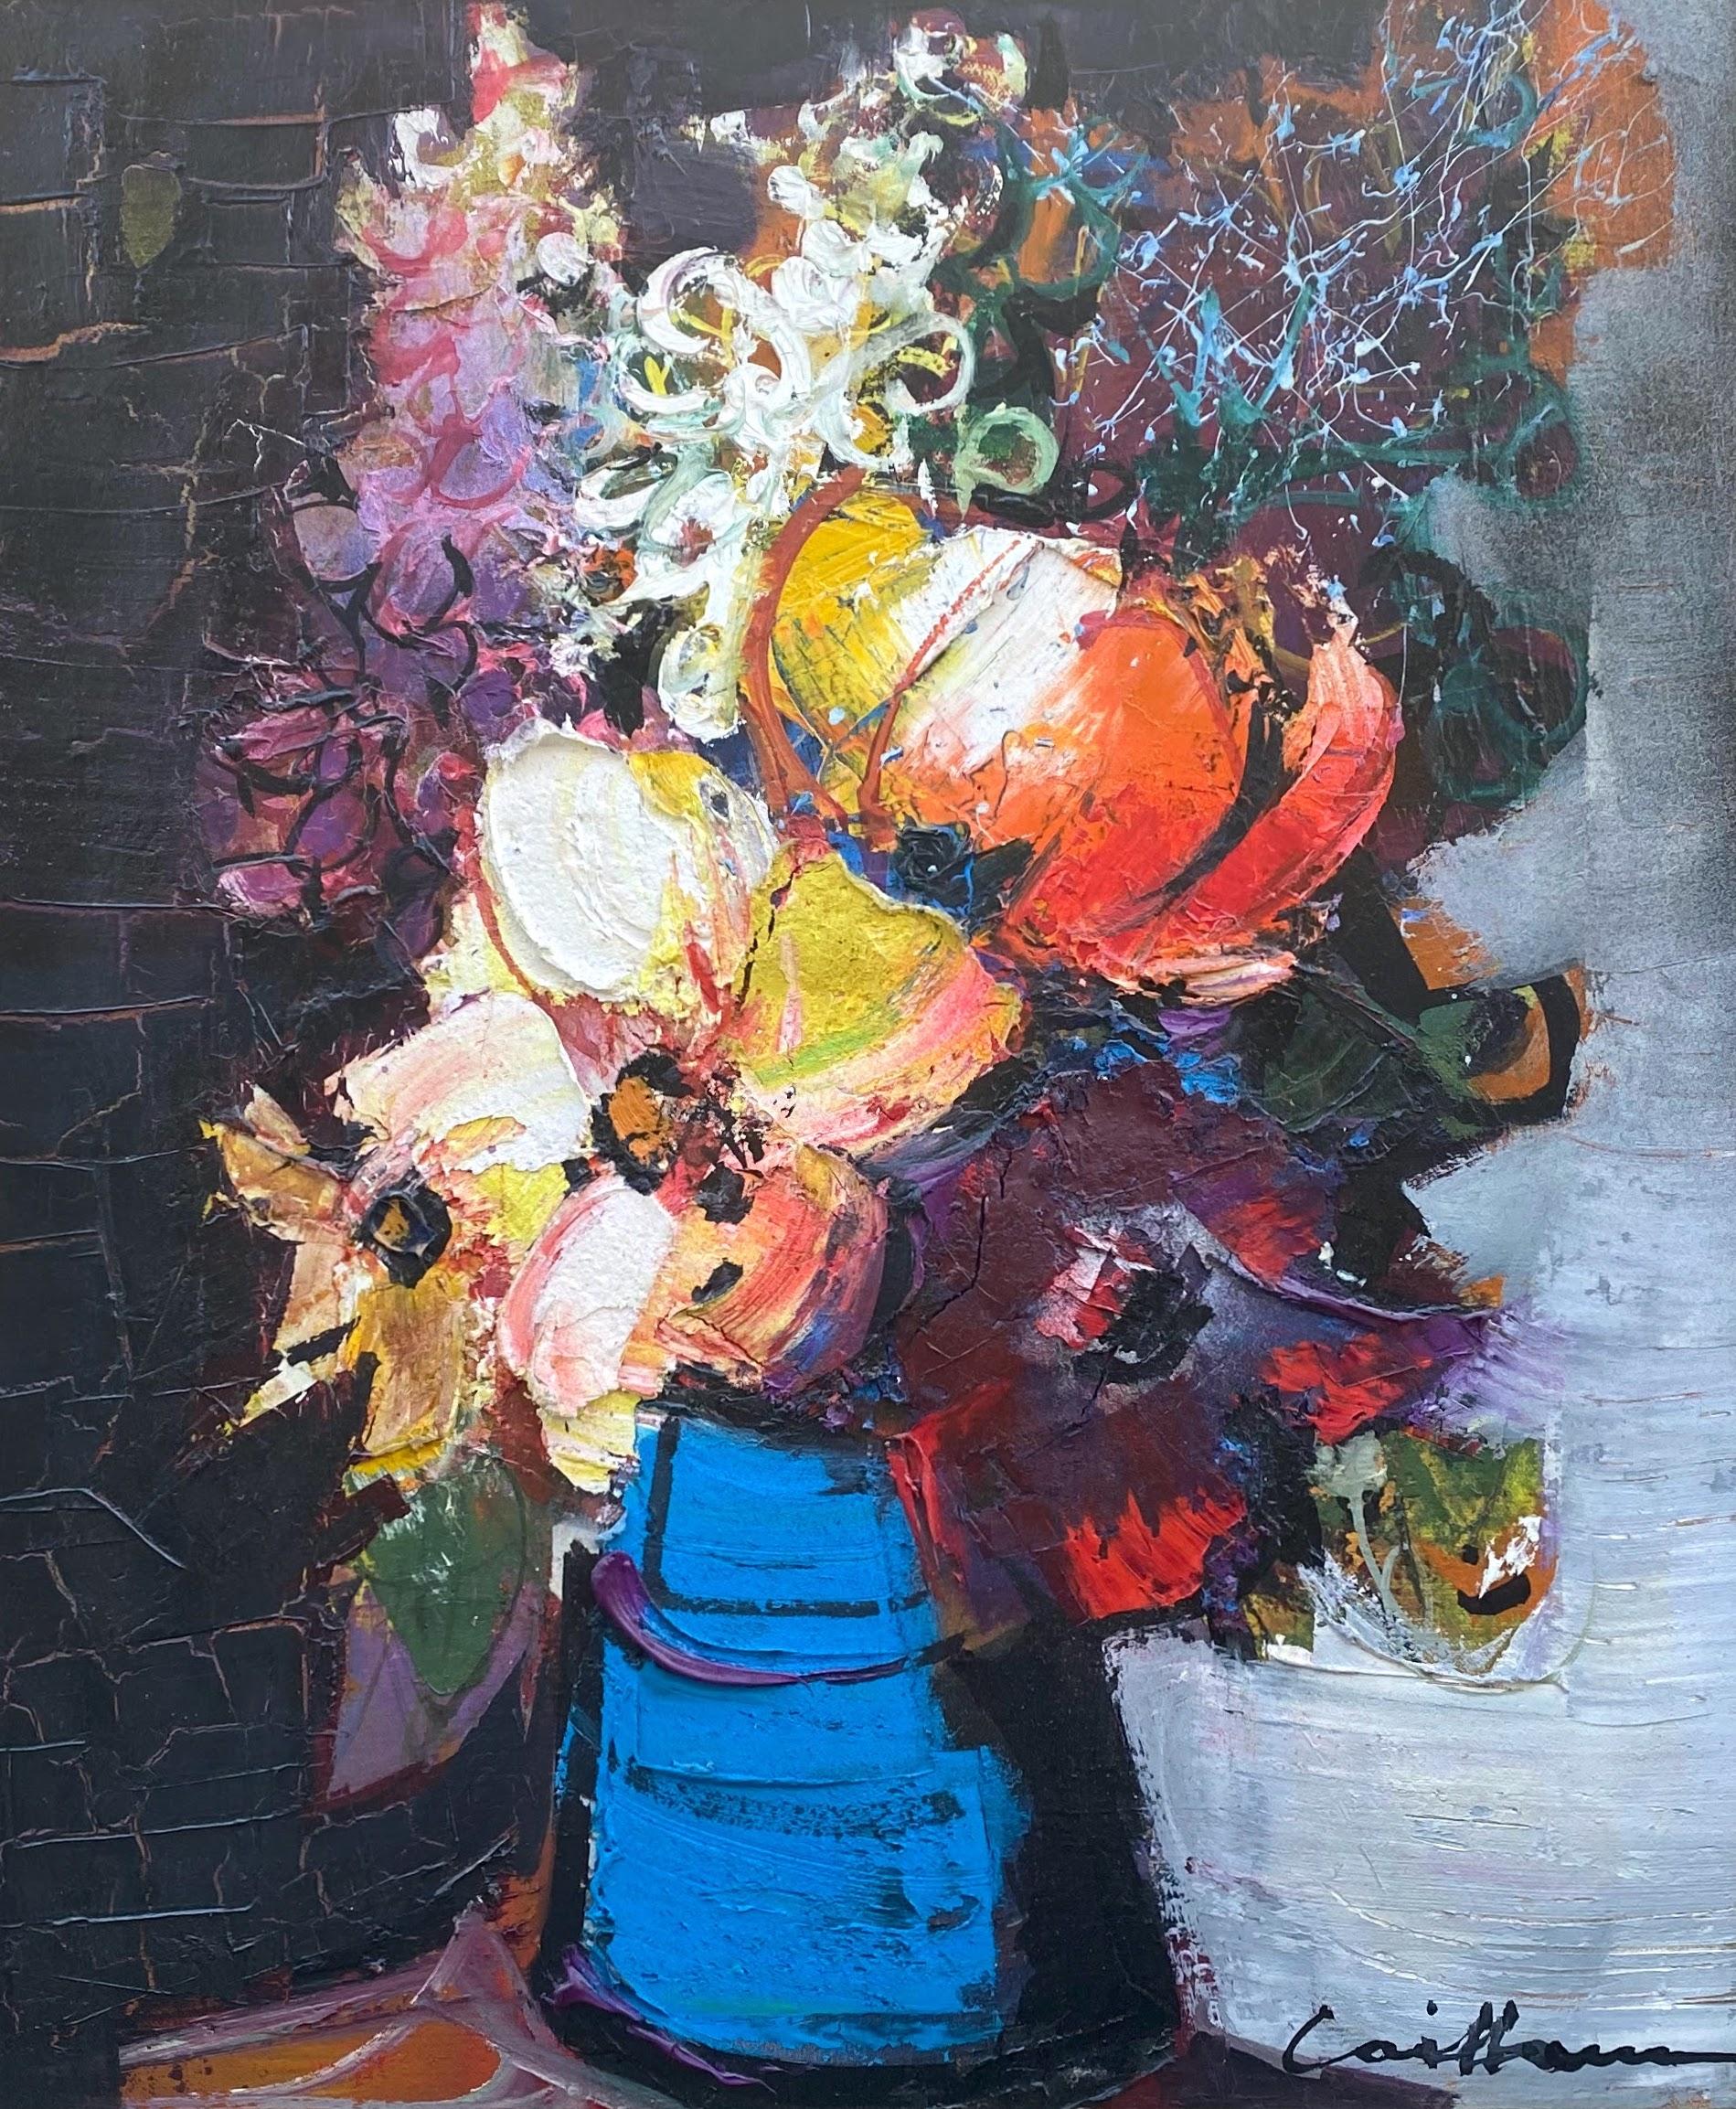 Colorful eye popping mid century floral still life, modern jazzy flower painting - Painting by Rodolphe Caillaux